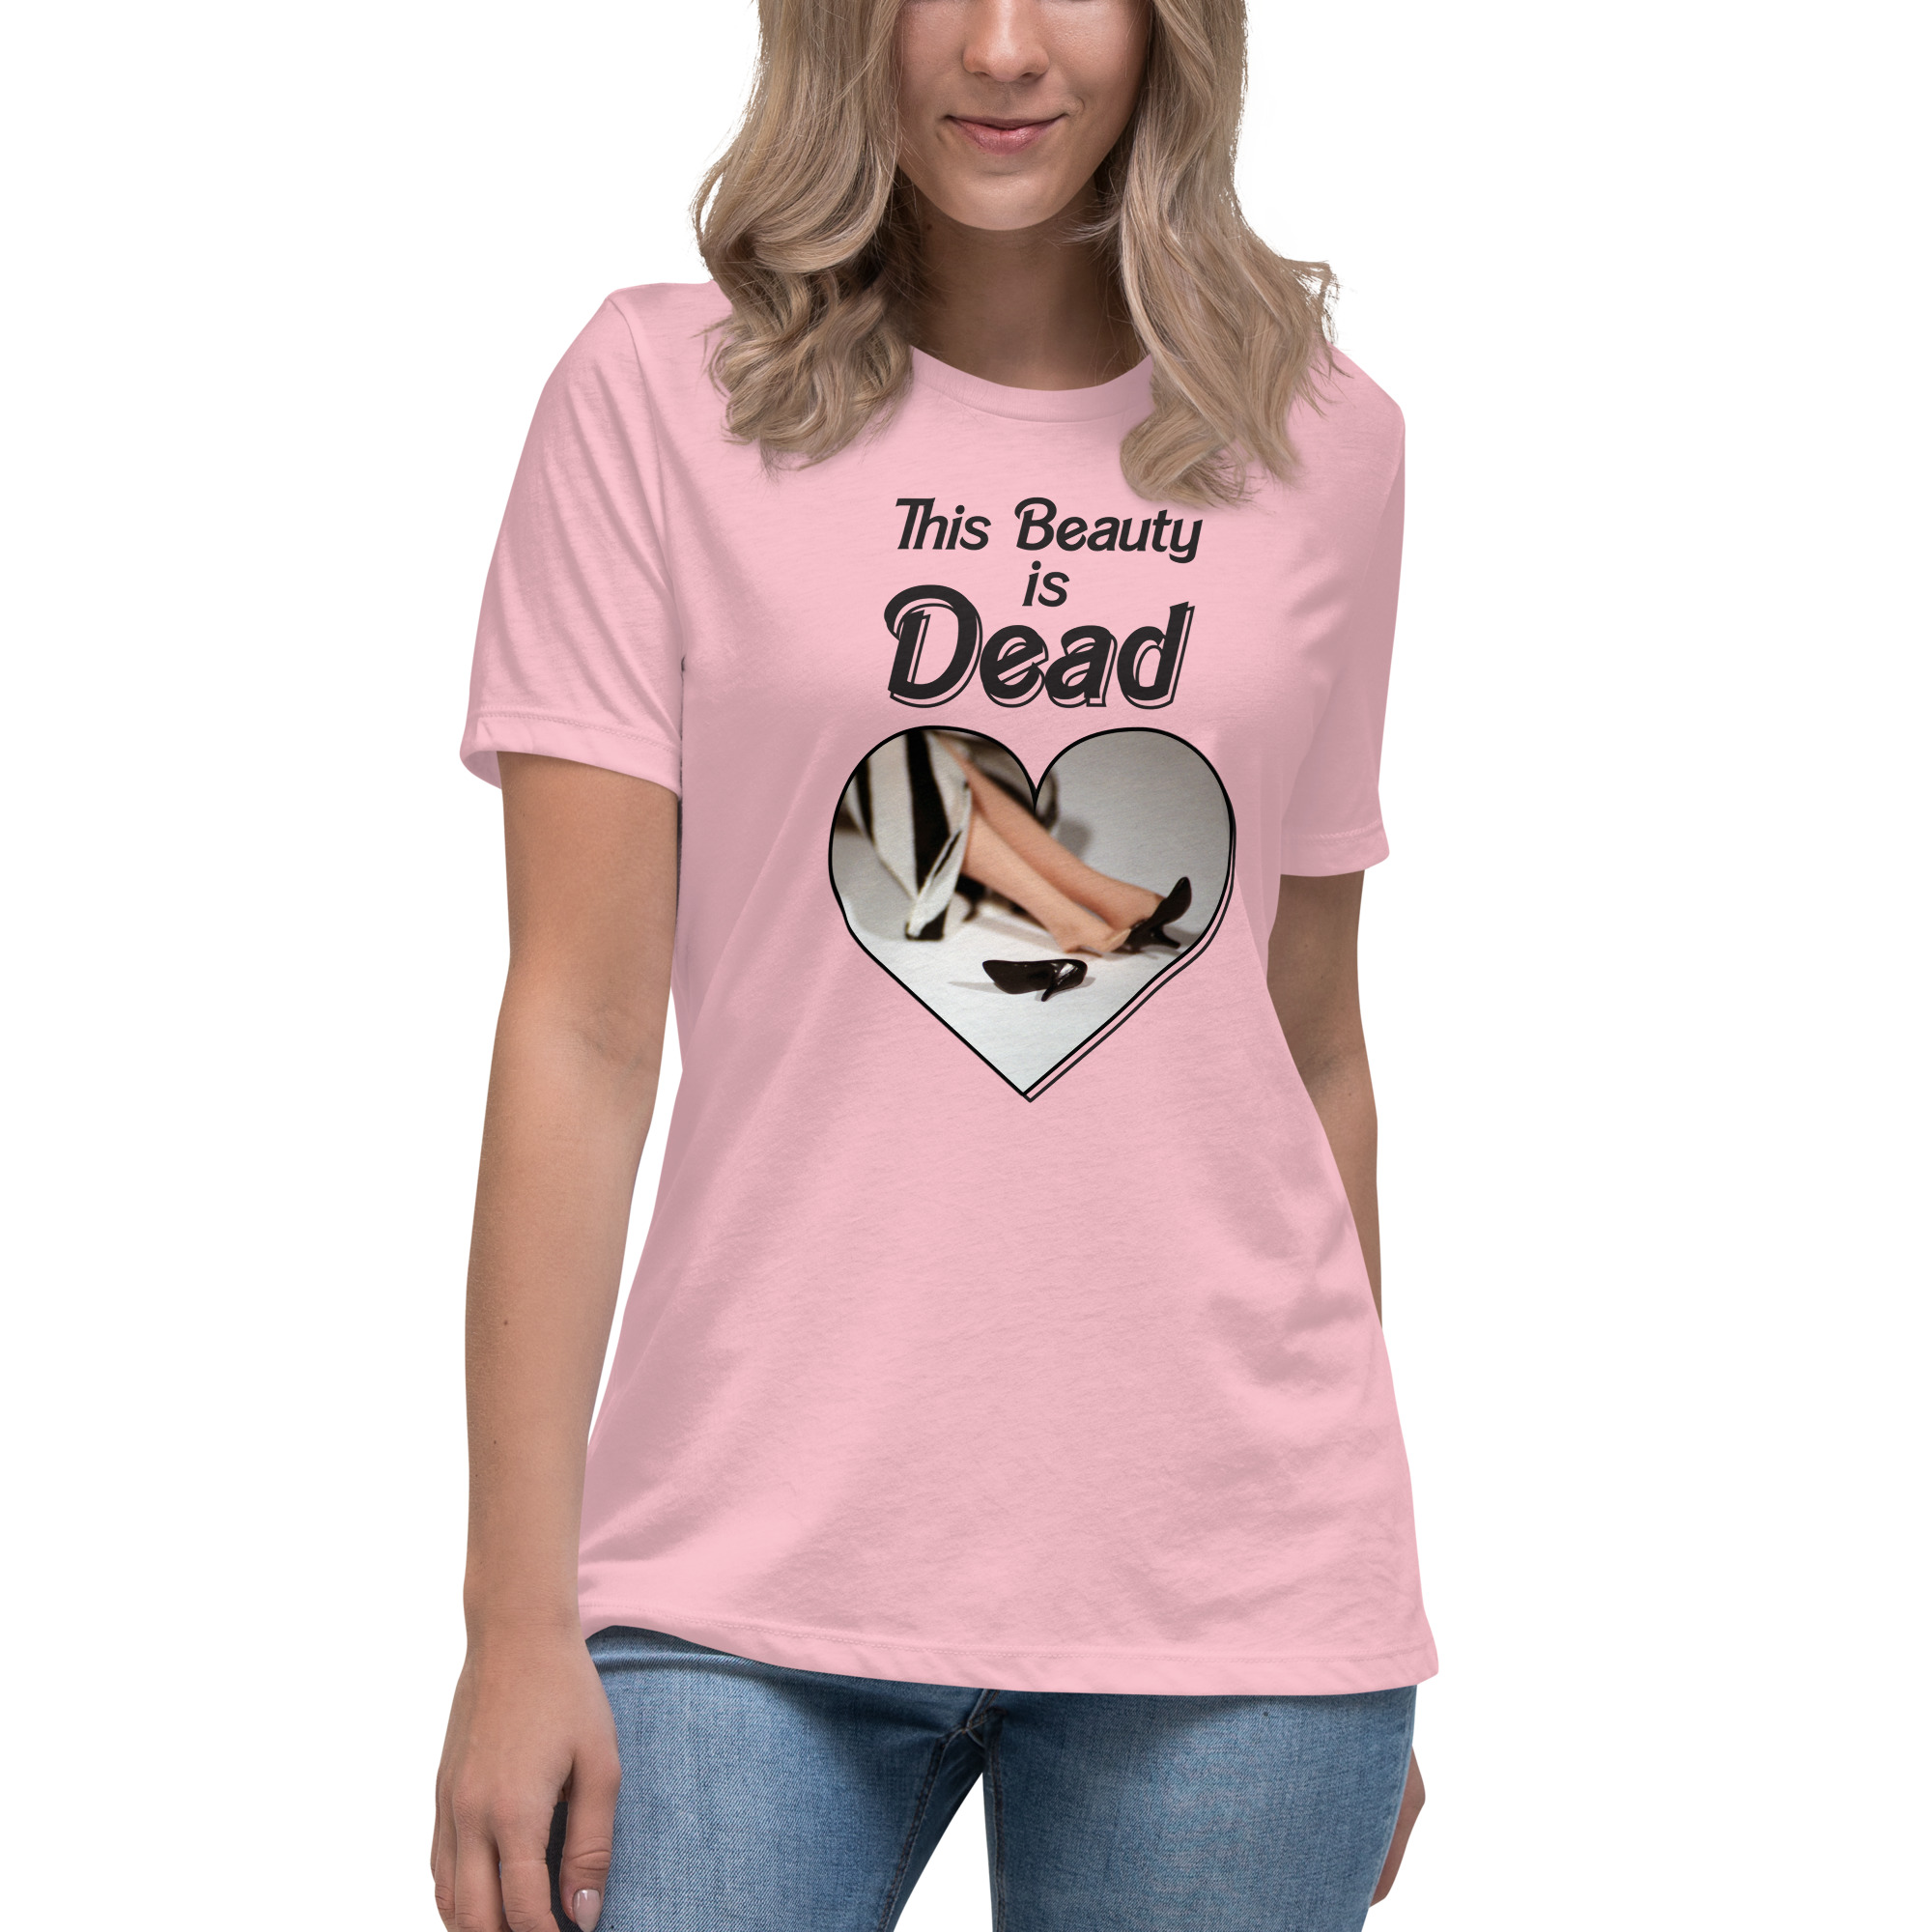 This Beauty is Dead Tshirt by Wilde Designs